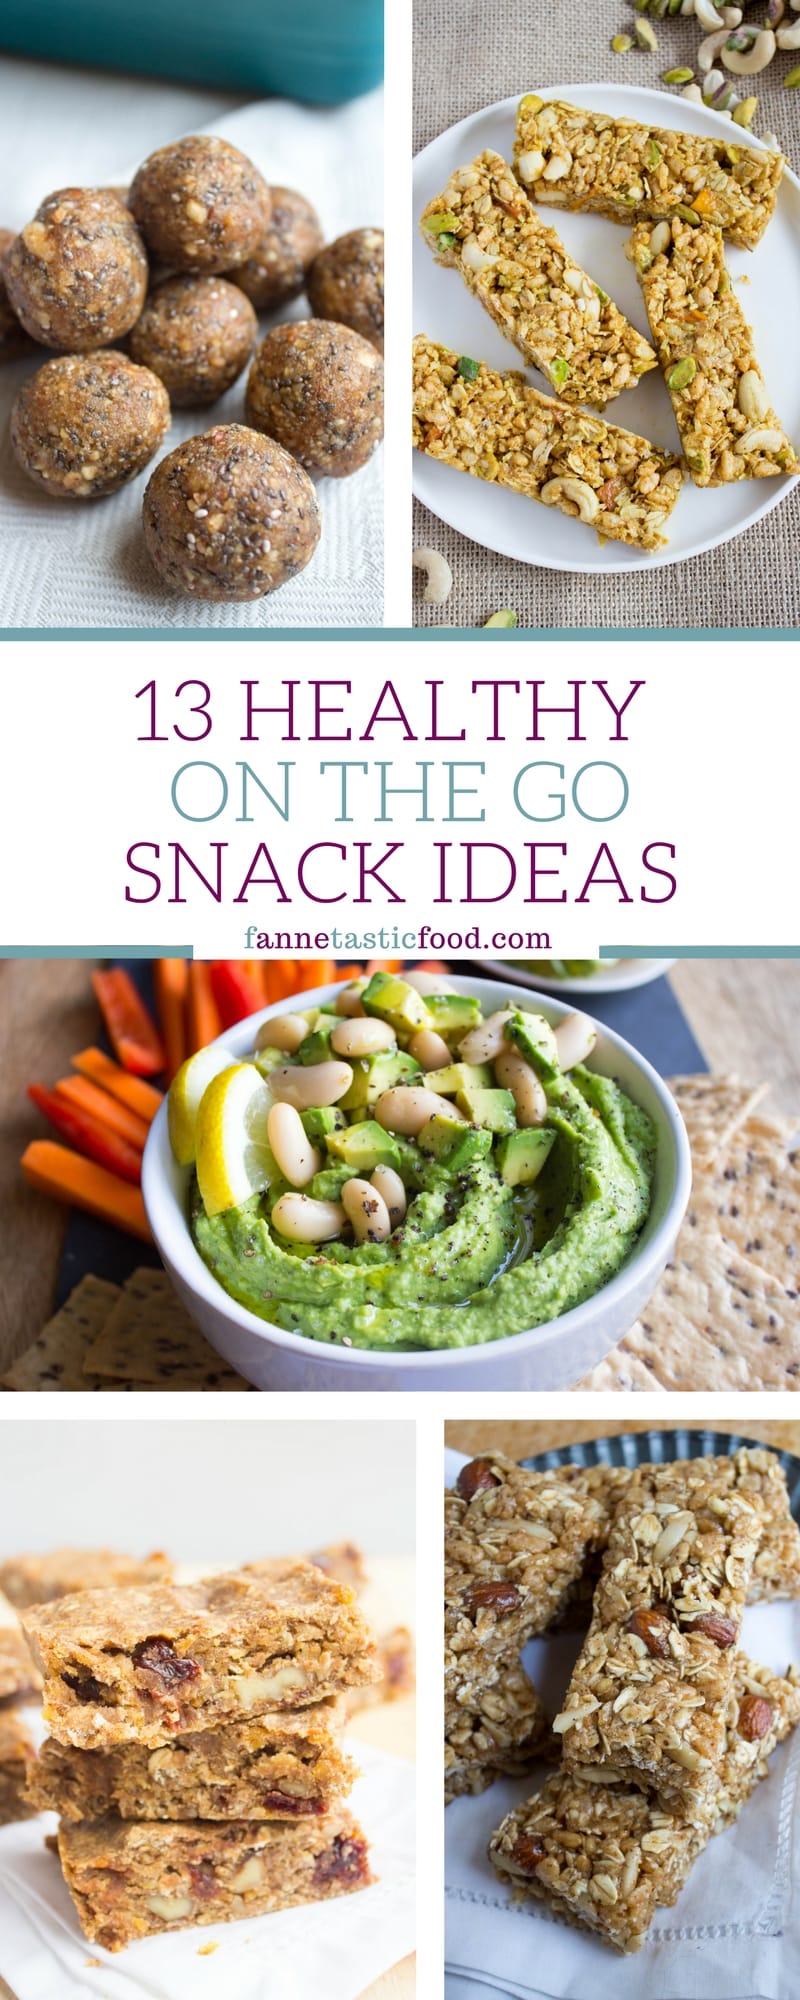 13 Healthy On the Go Snack Recipes - fANNEtastic food | Registered ...